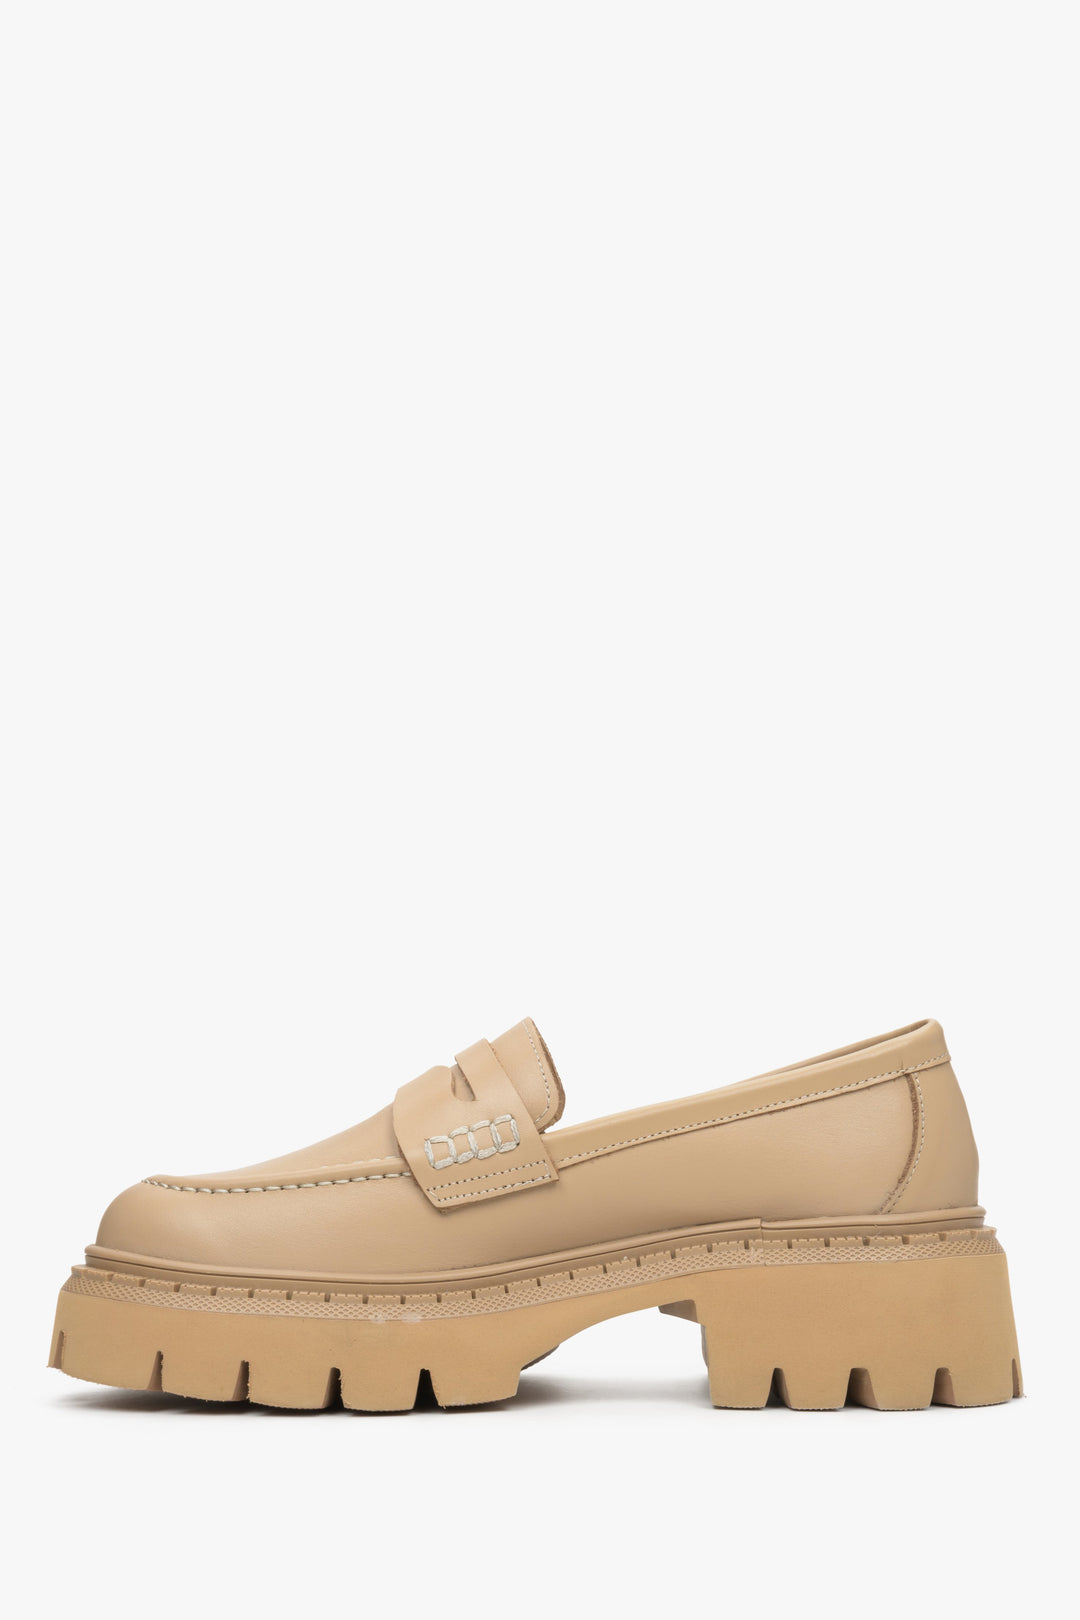 Beige women's loafers with a wide black sole - profile.